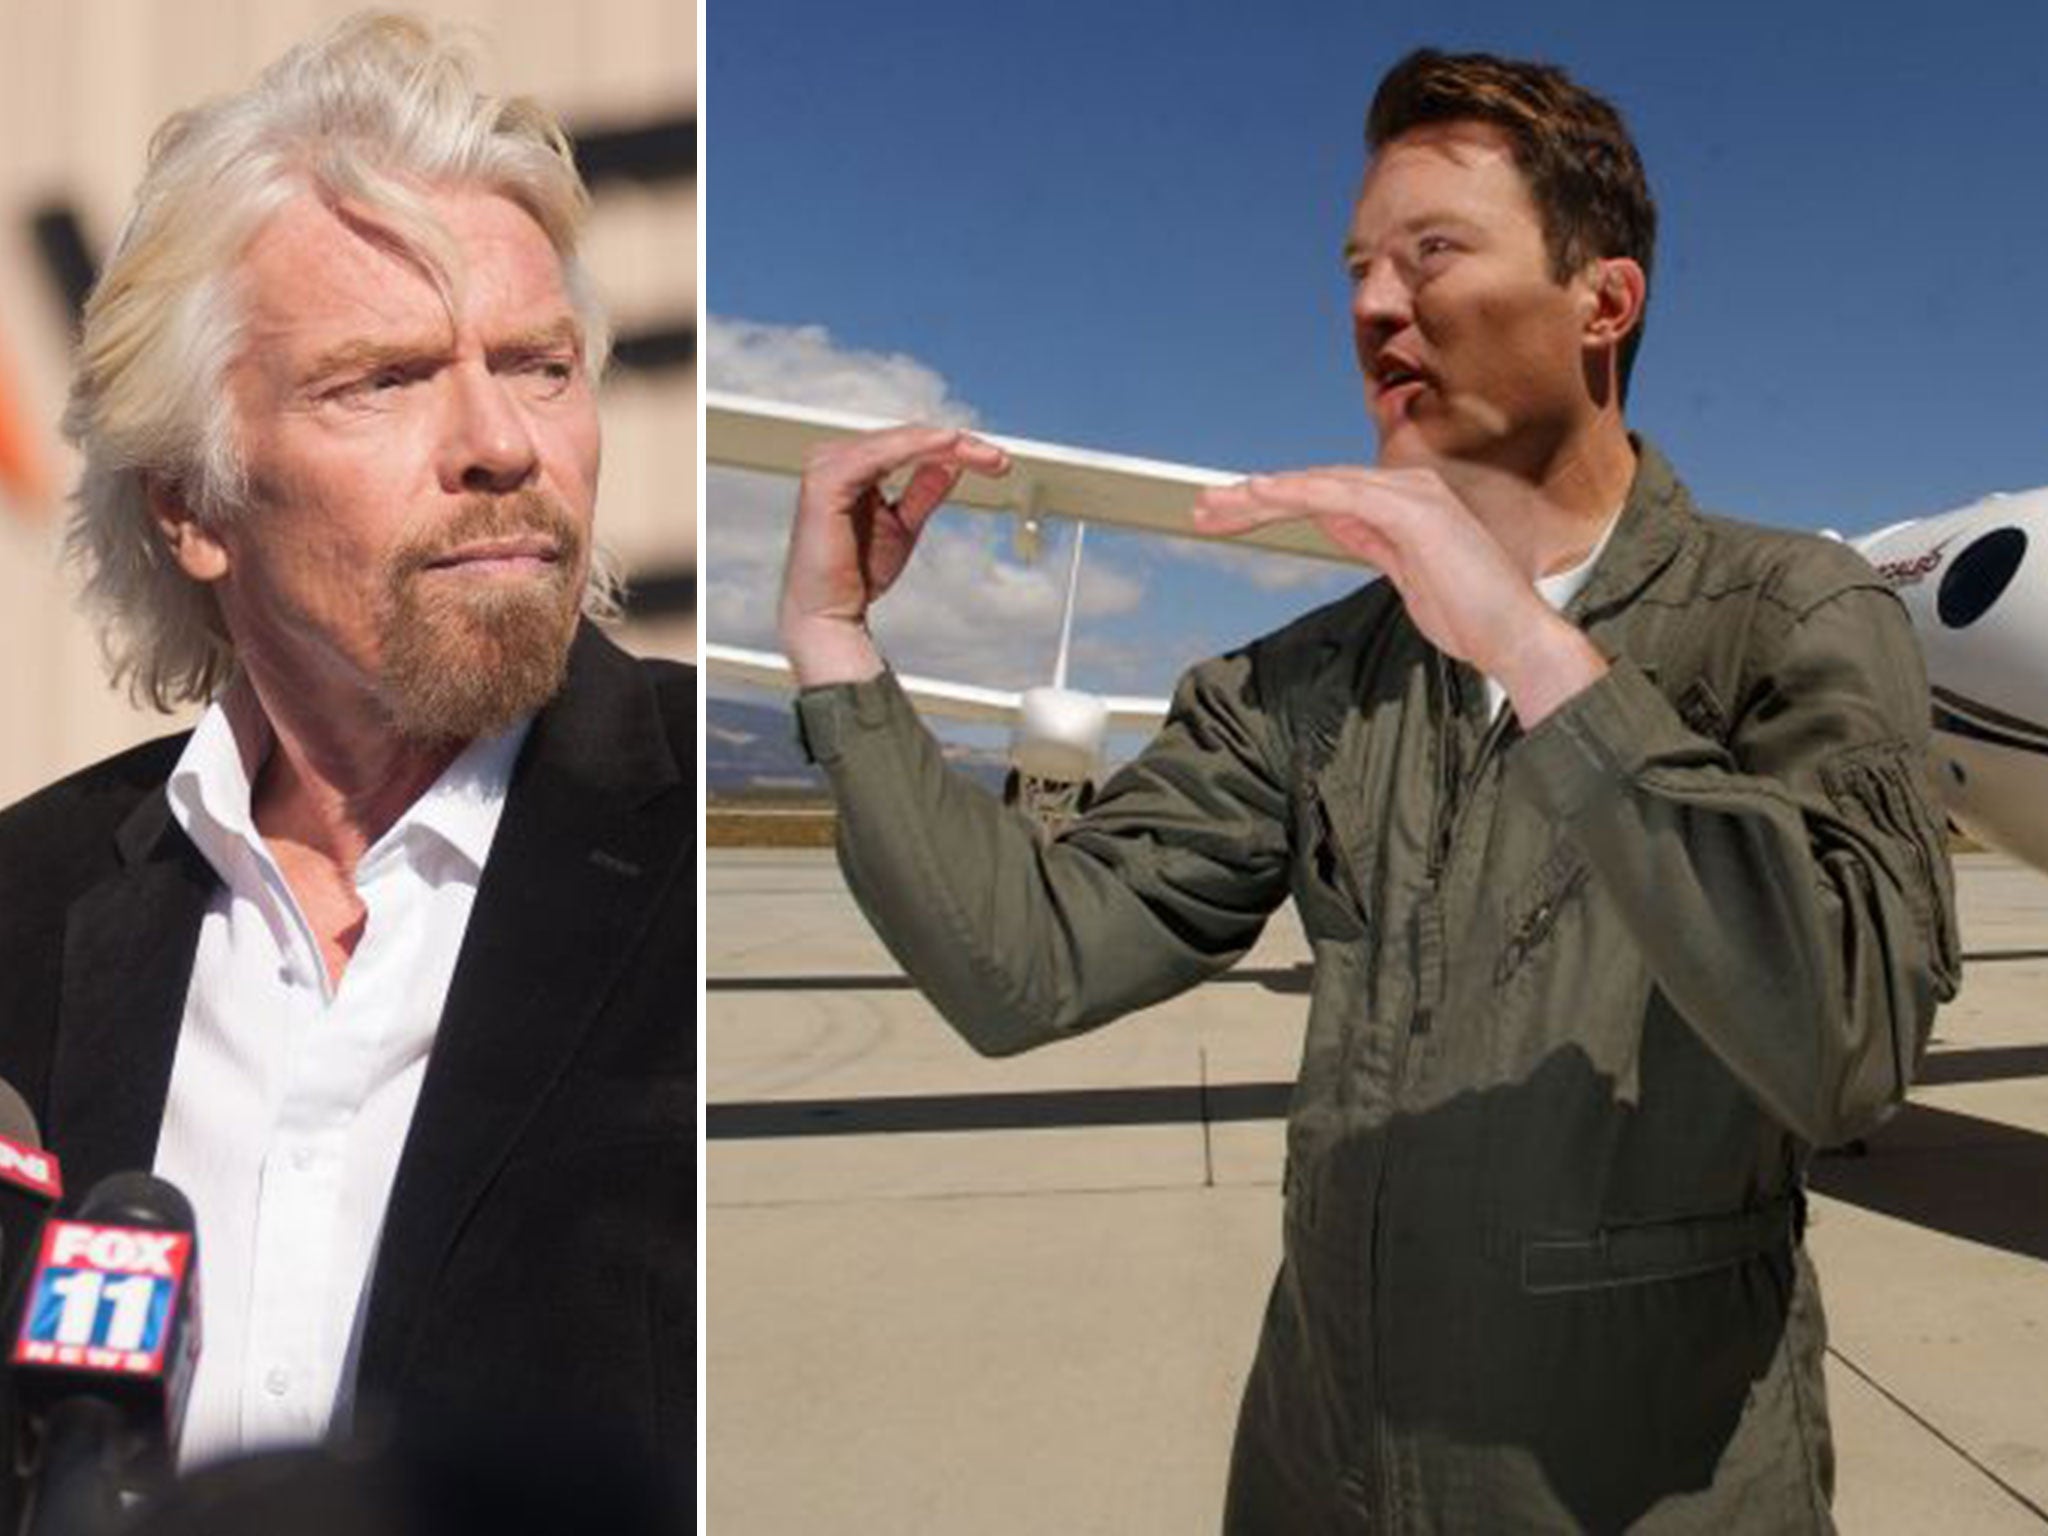 Virgin CEO, Richard Branson, left, and Michael Alsbury, the pilot who died when SpaceShipTwo crashed